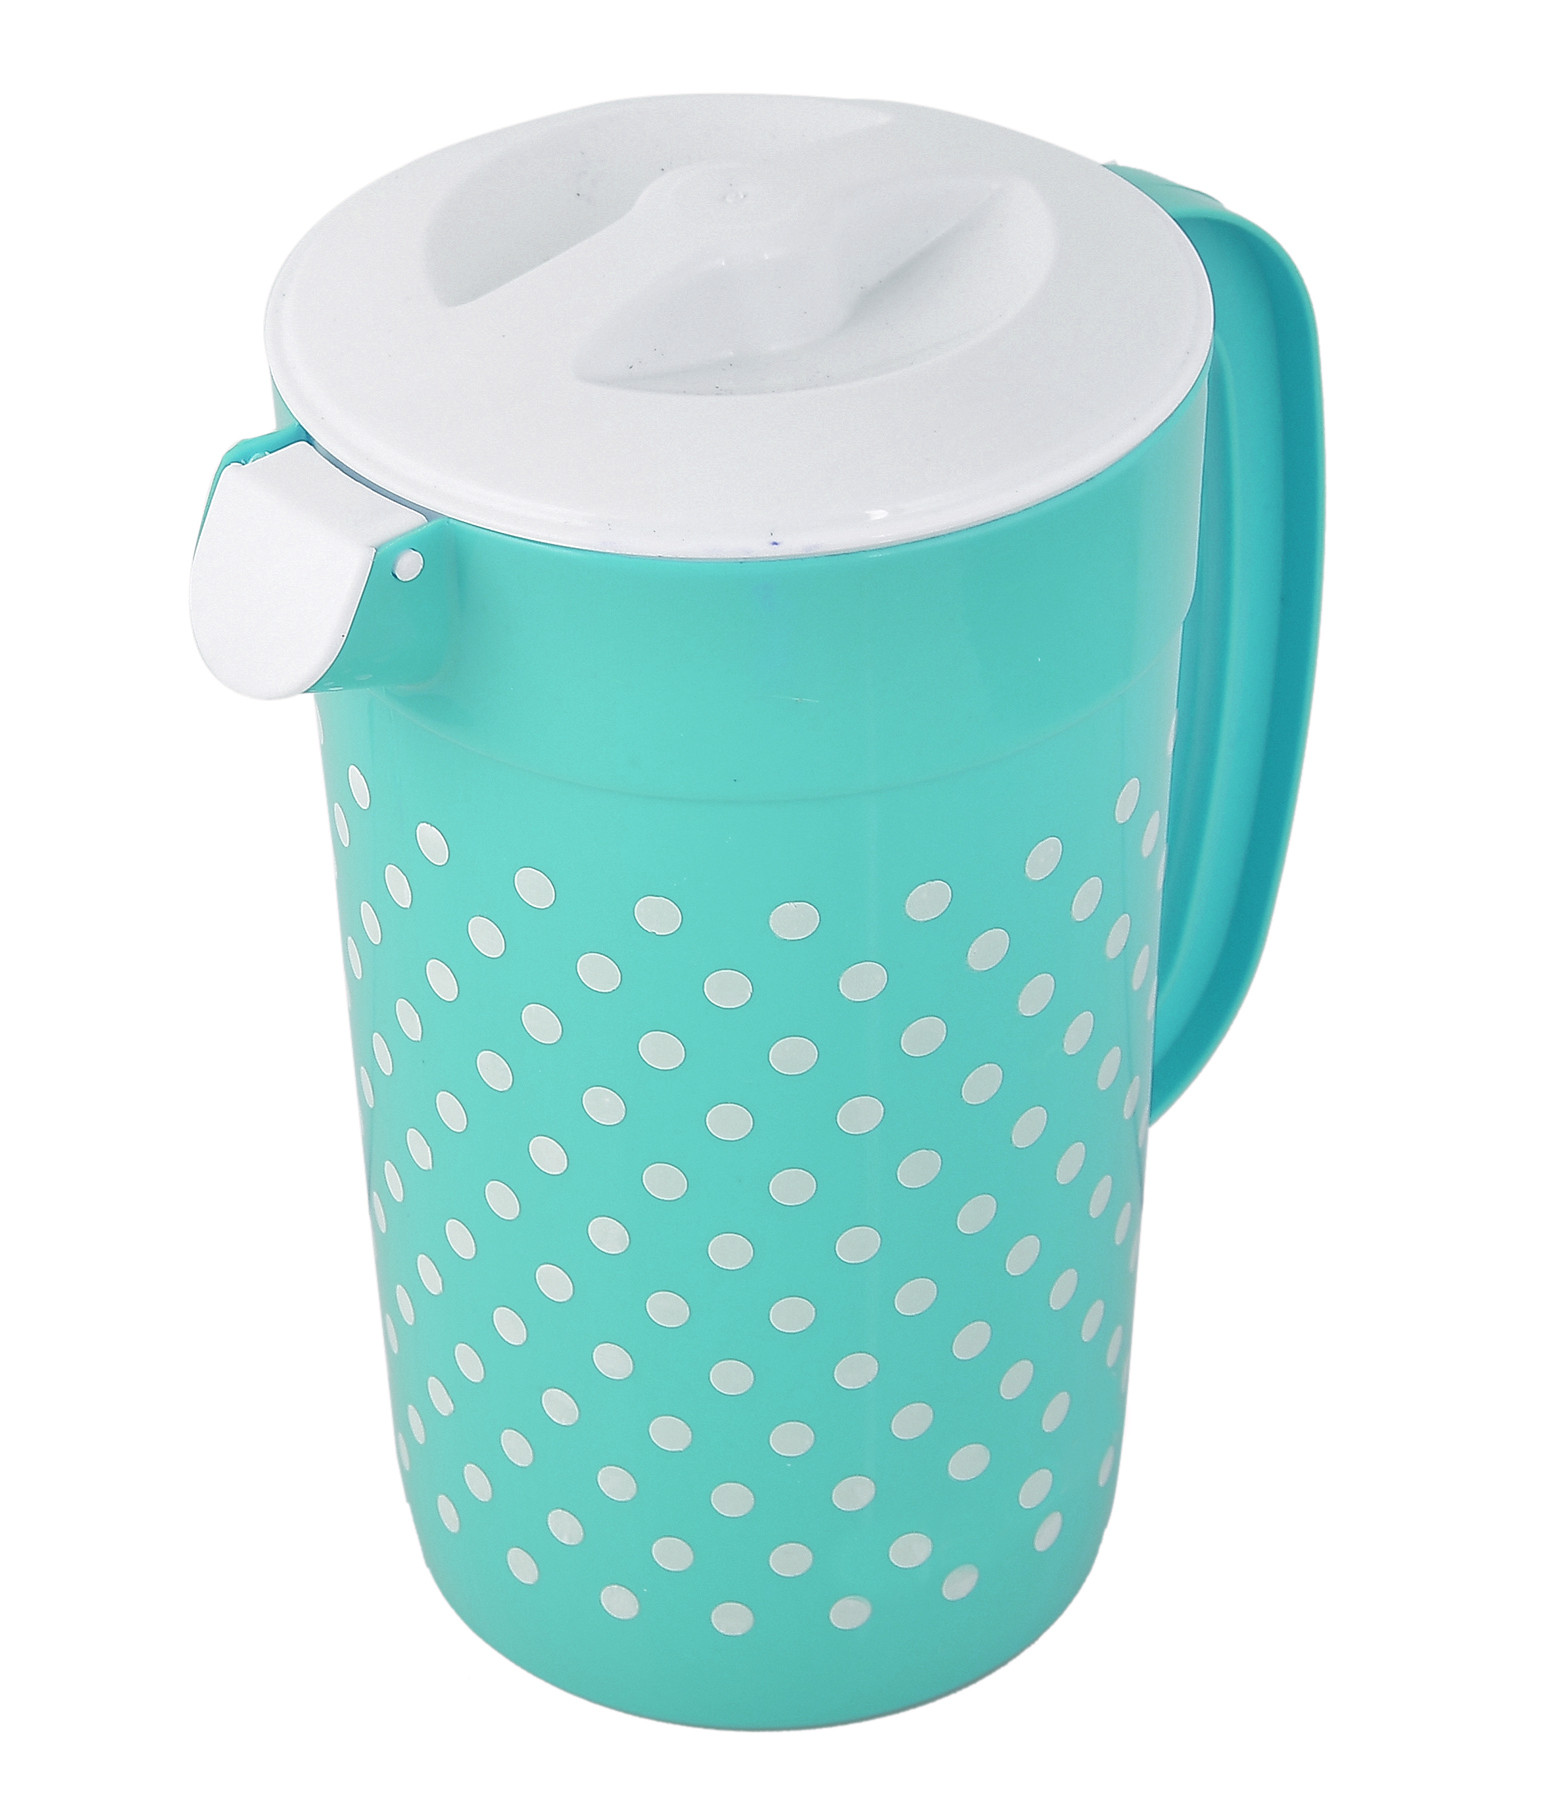 Kuber Industries Dot Printed Unbreakable Multipurpose Plastic Water Jug/Pitcher With Lid, 2.4 Ltr. (Green)-HS42KUBMART25213